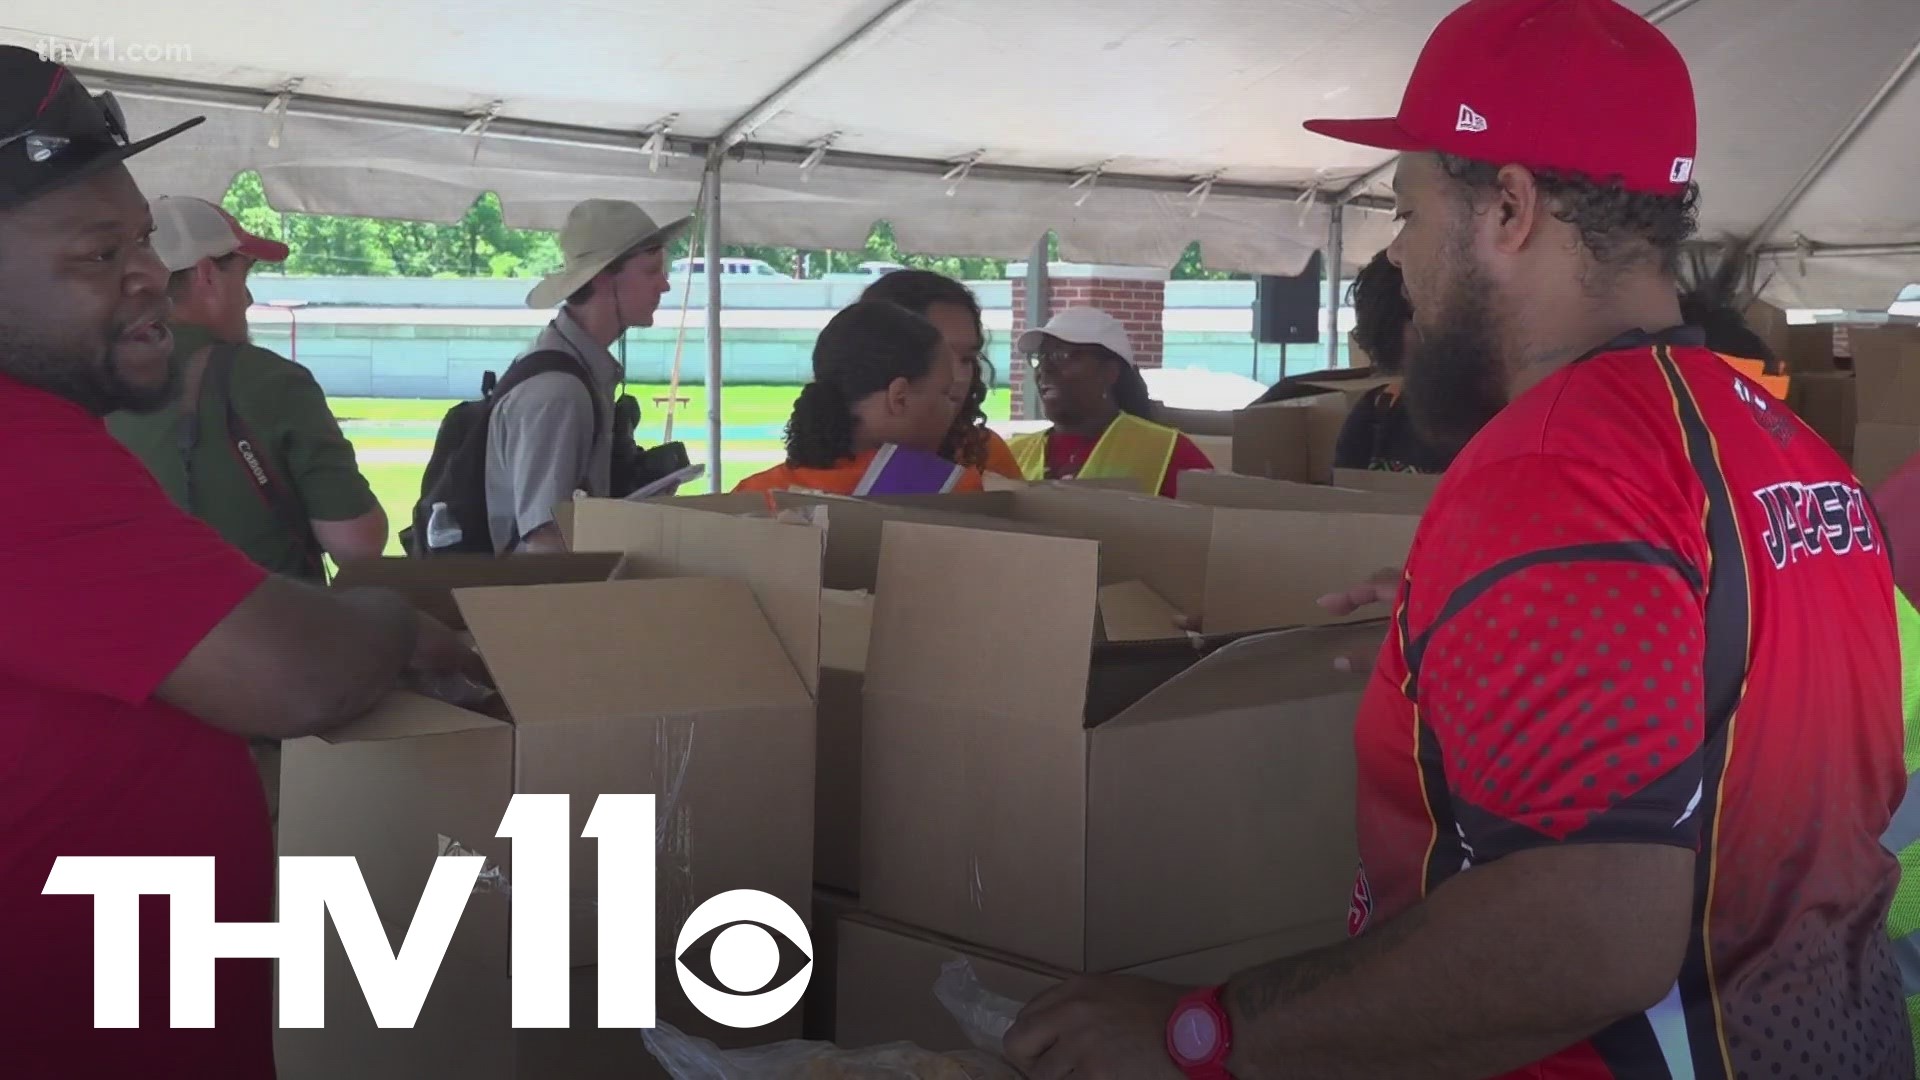 On this Juneteenth holiday, the Arkansas Martin Luther King Jr. Commission spent the day in Jacksonville making sure families have food this summer.